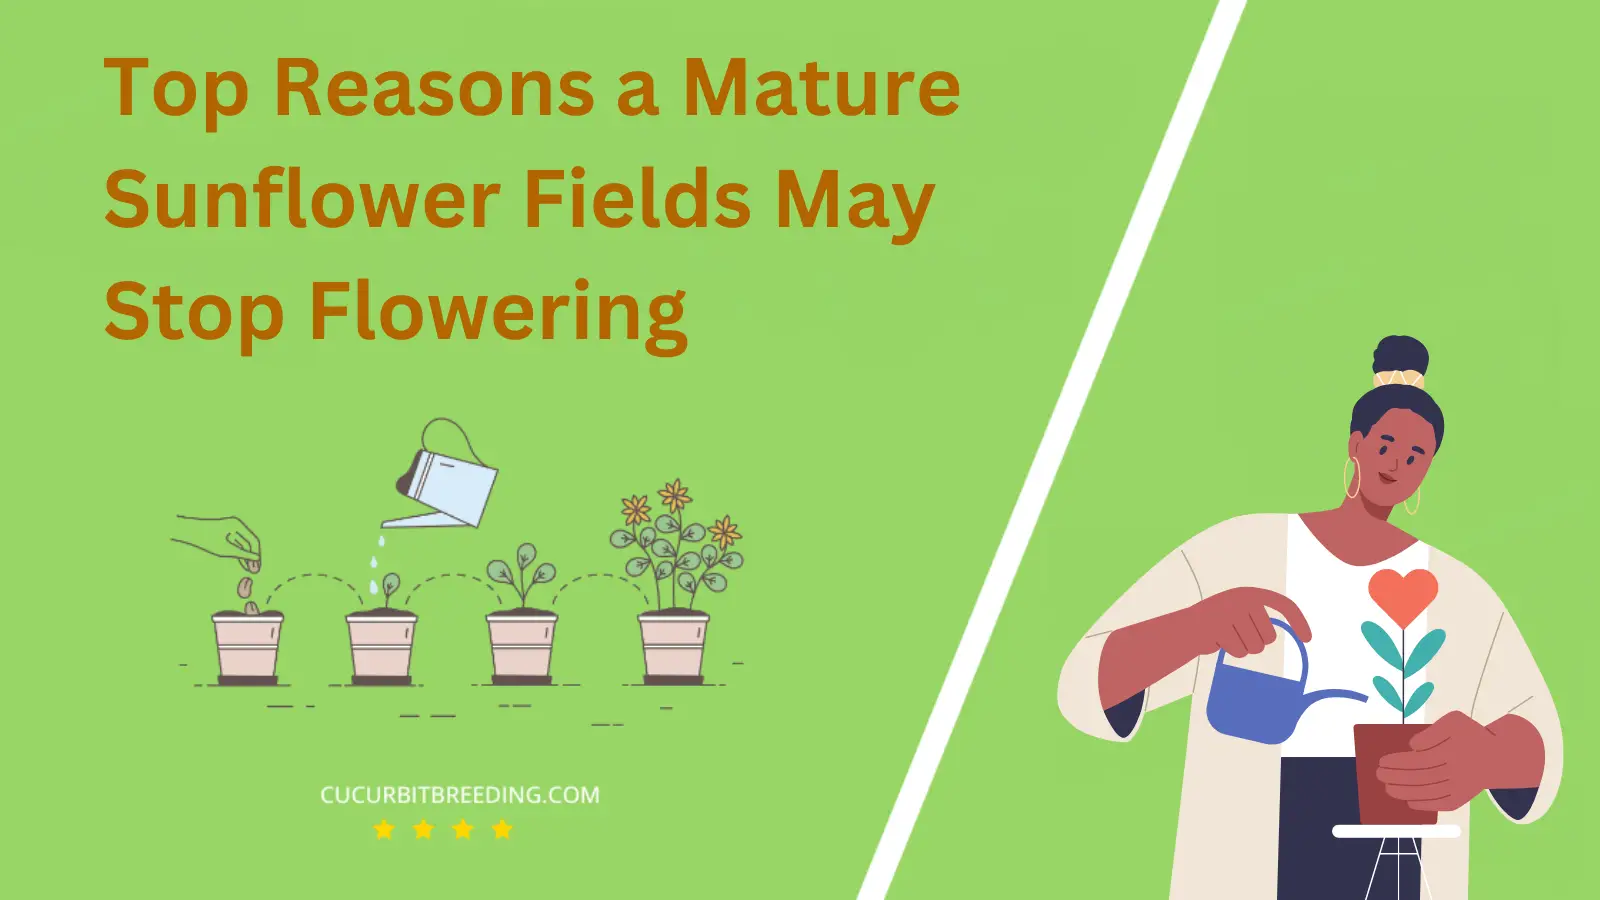 Top Reasons a Mature Sunflower Fields May Stop Flowering